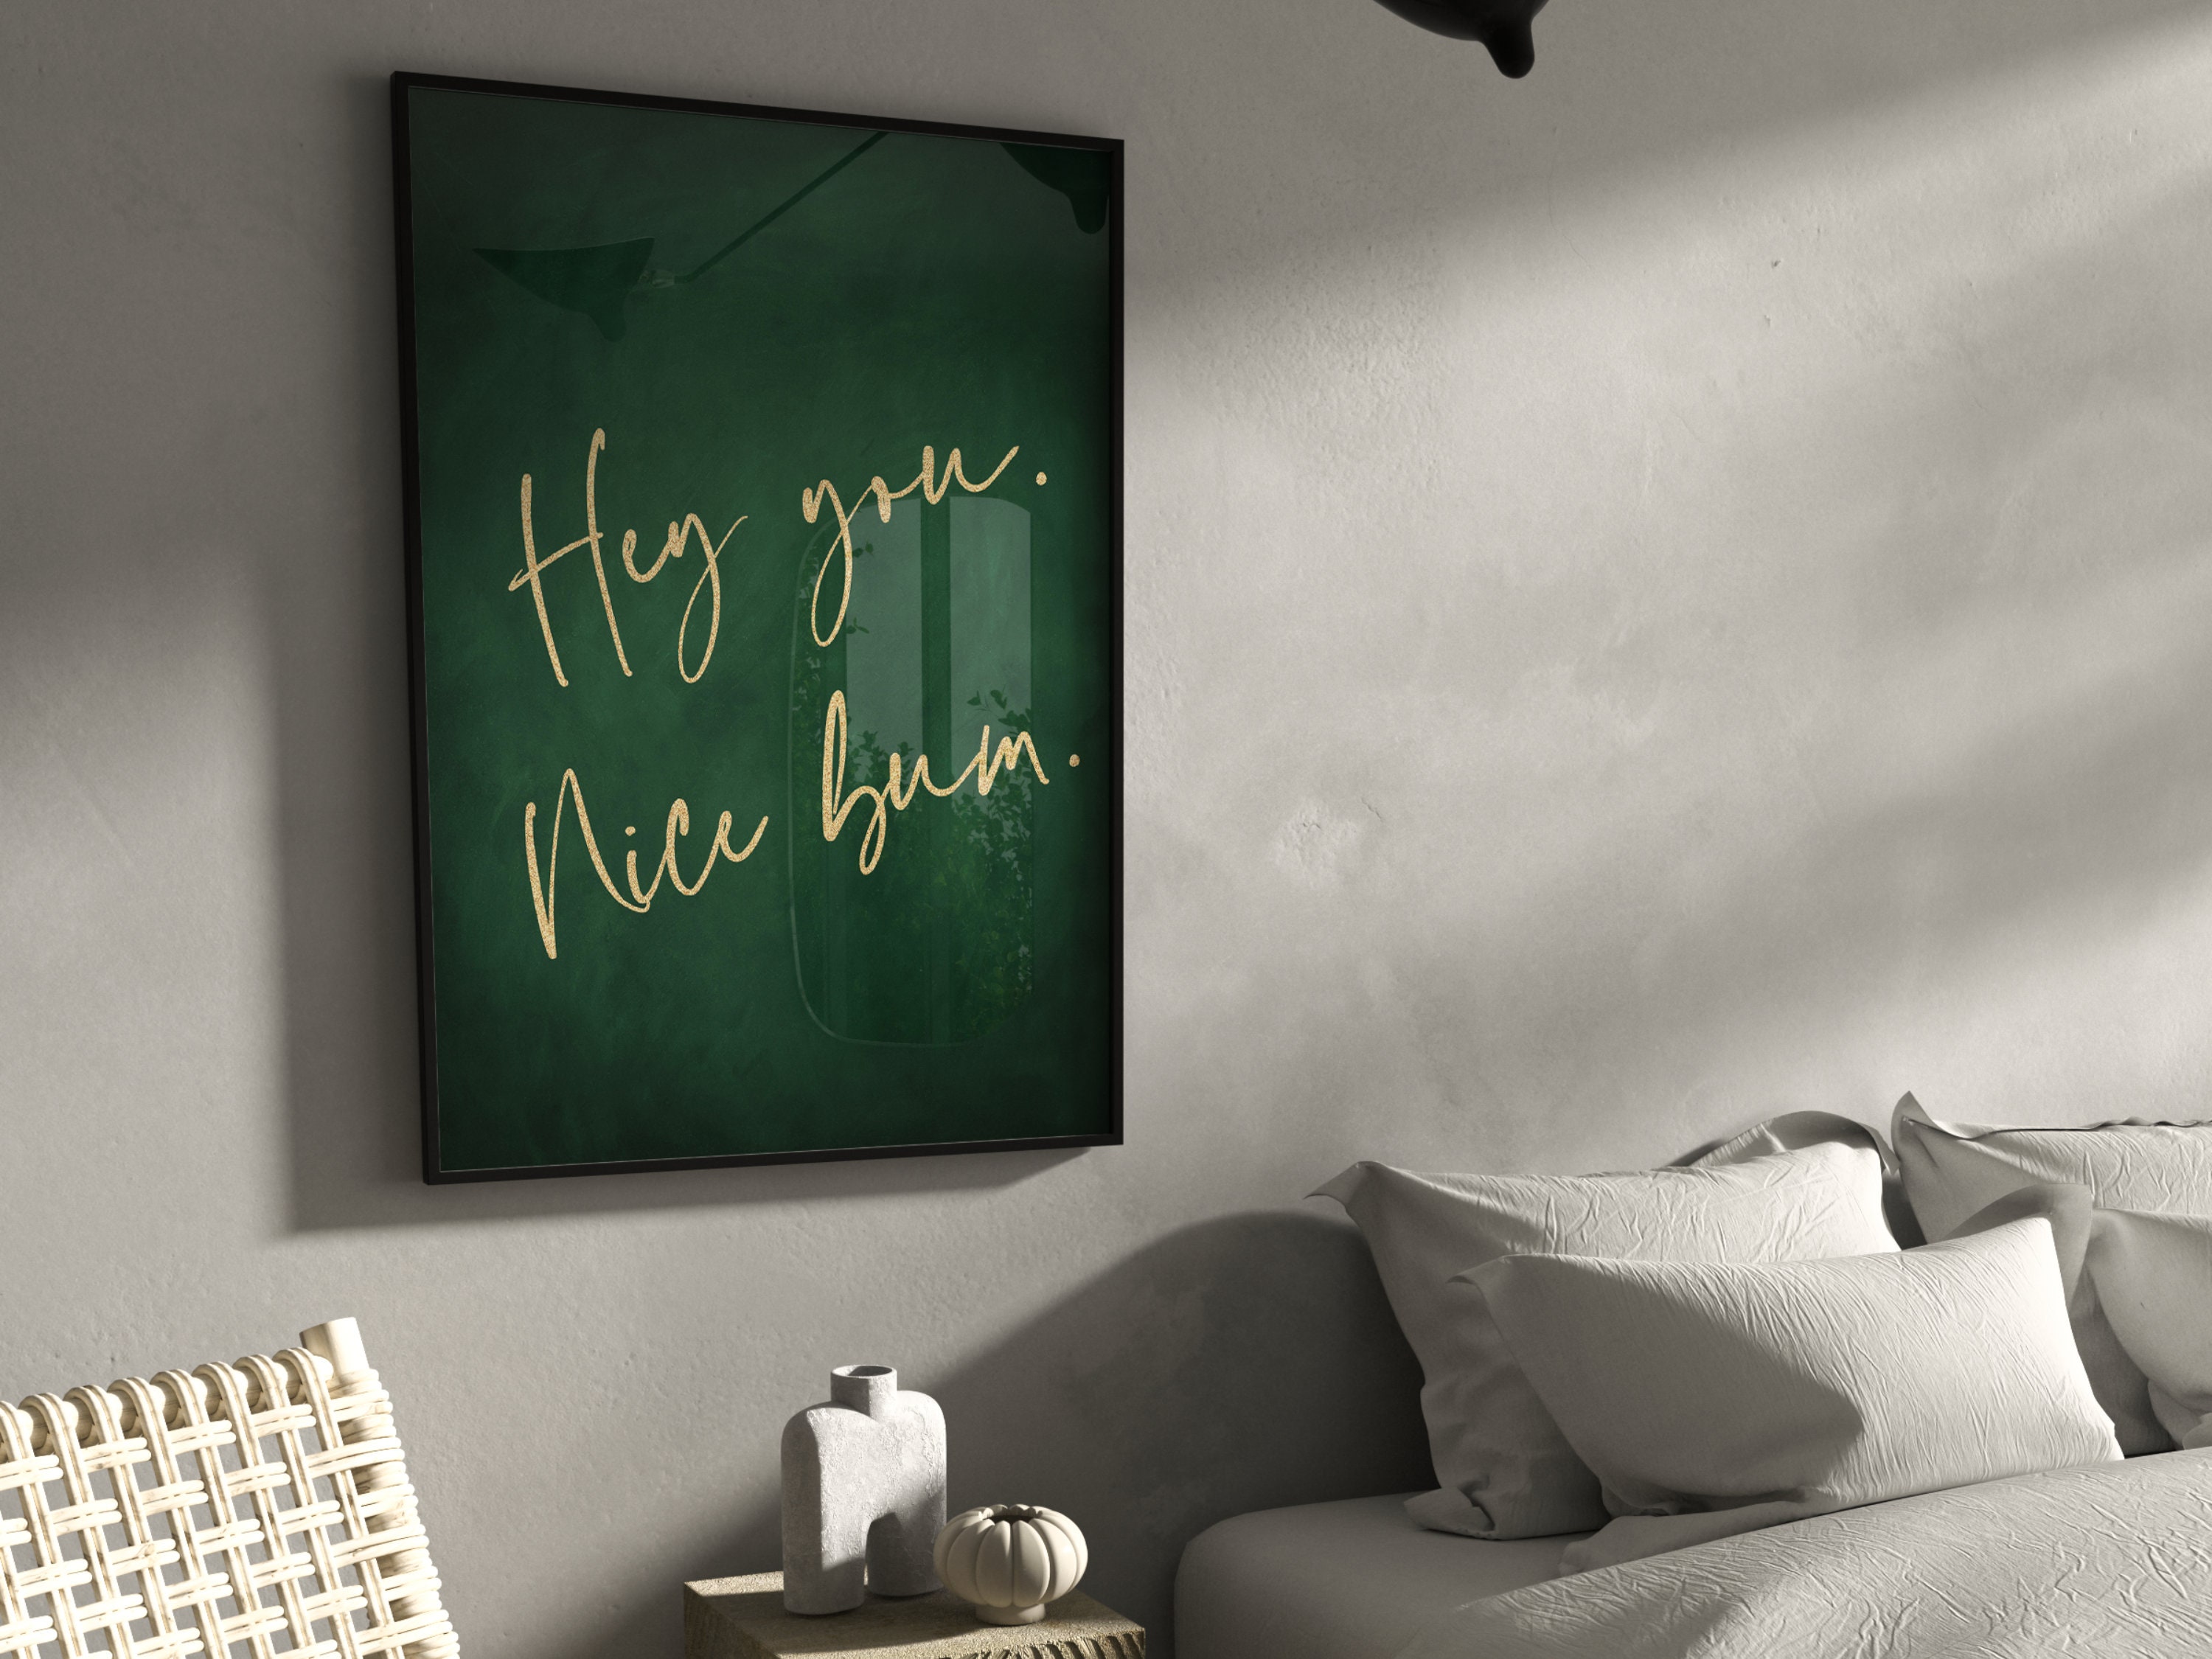 Green and Gold Nice Bum Print Emerald Green Decor Bedroom - Etsy